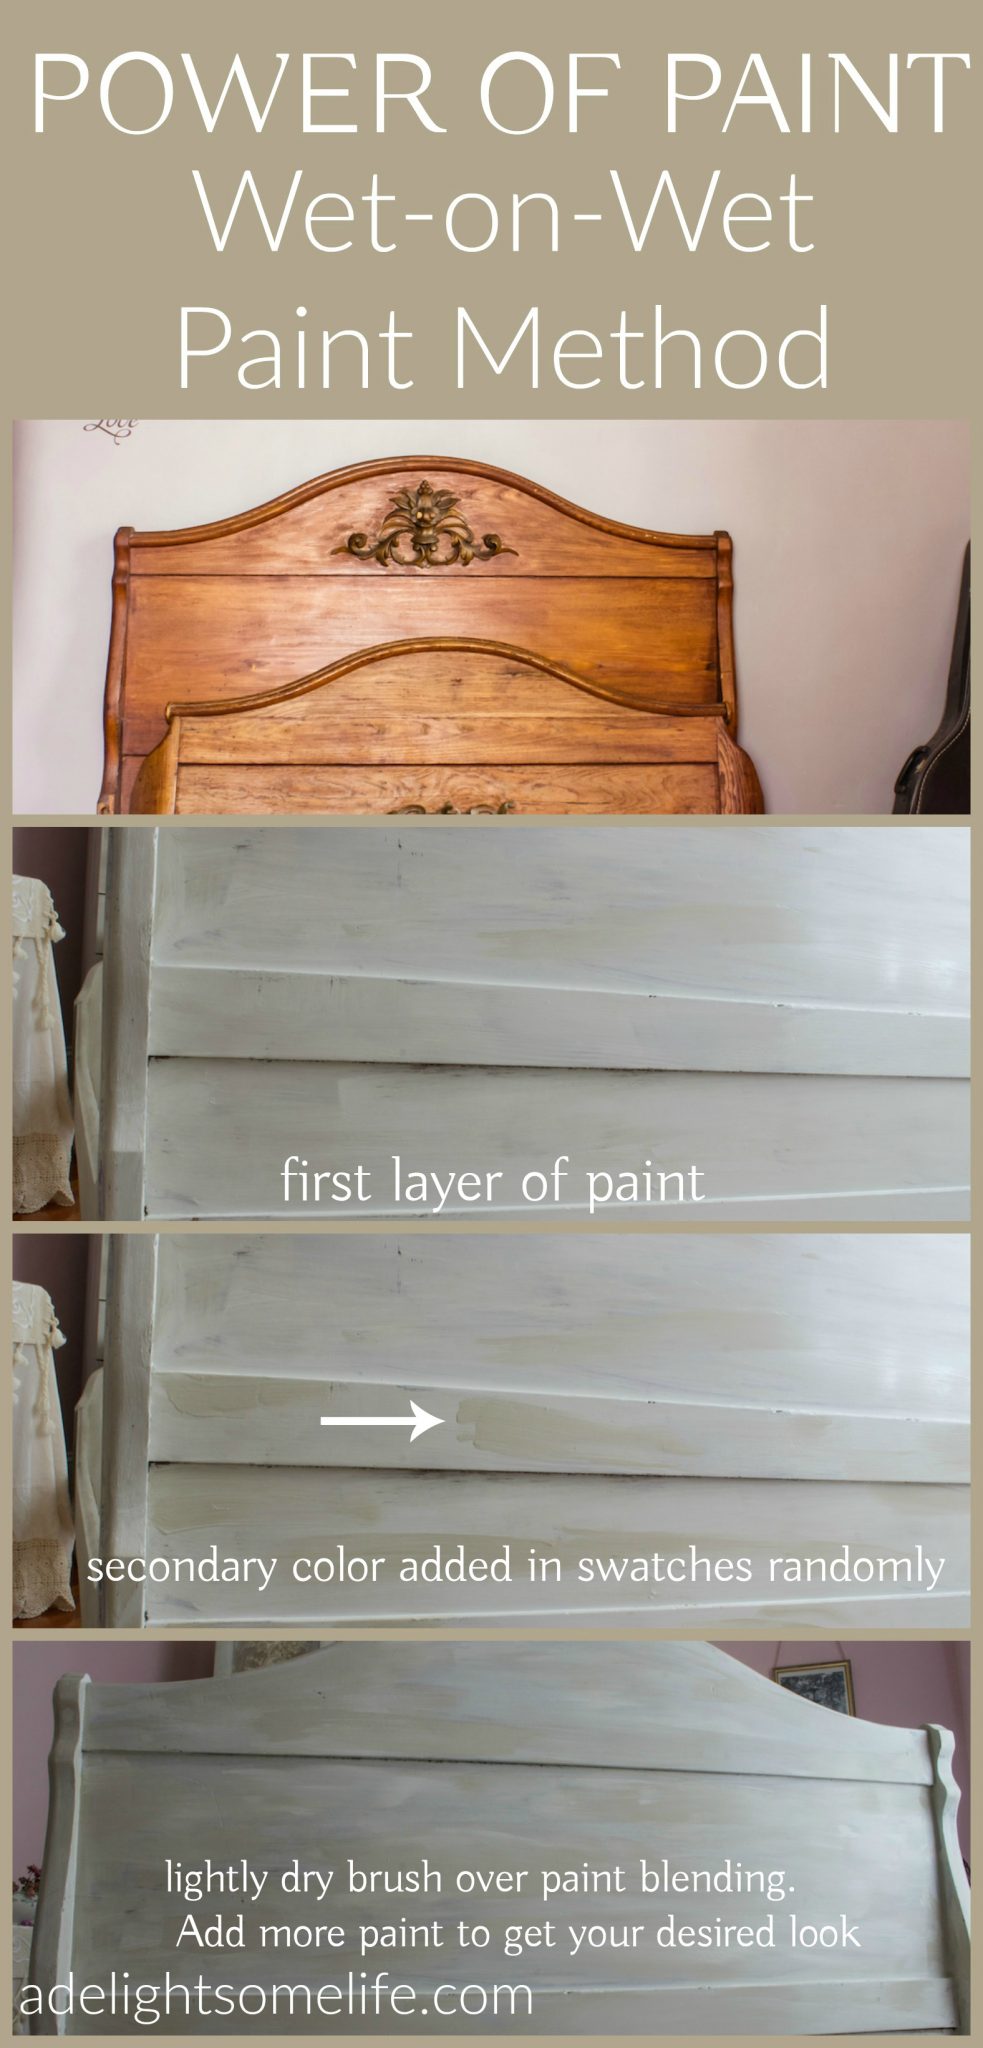 Painted Furniture. The power of paint. Easy step-by-step wet on wet paint method.